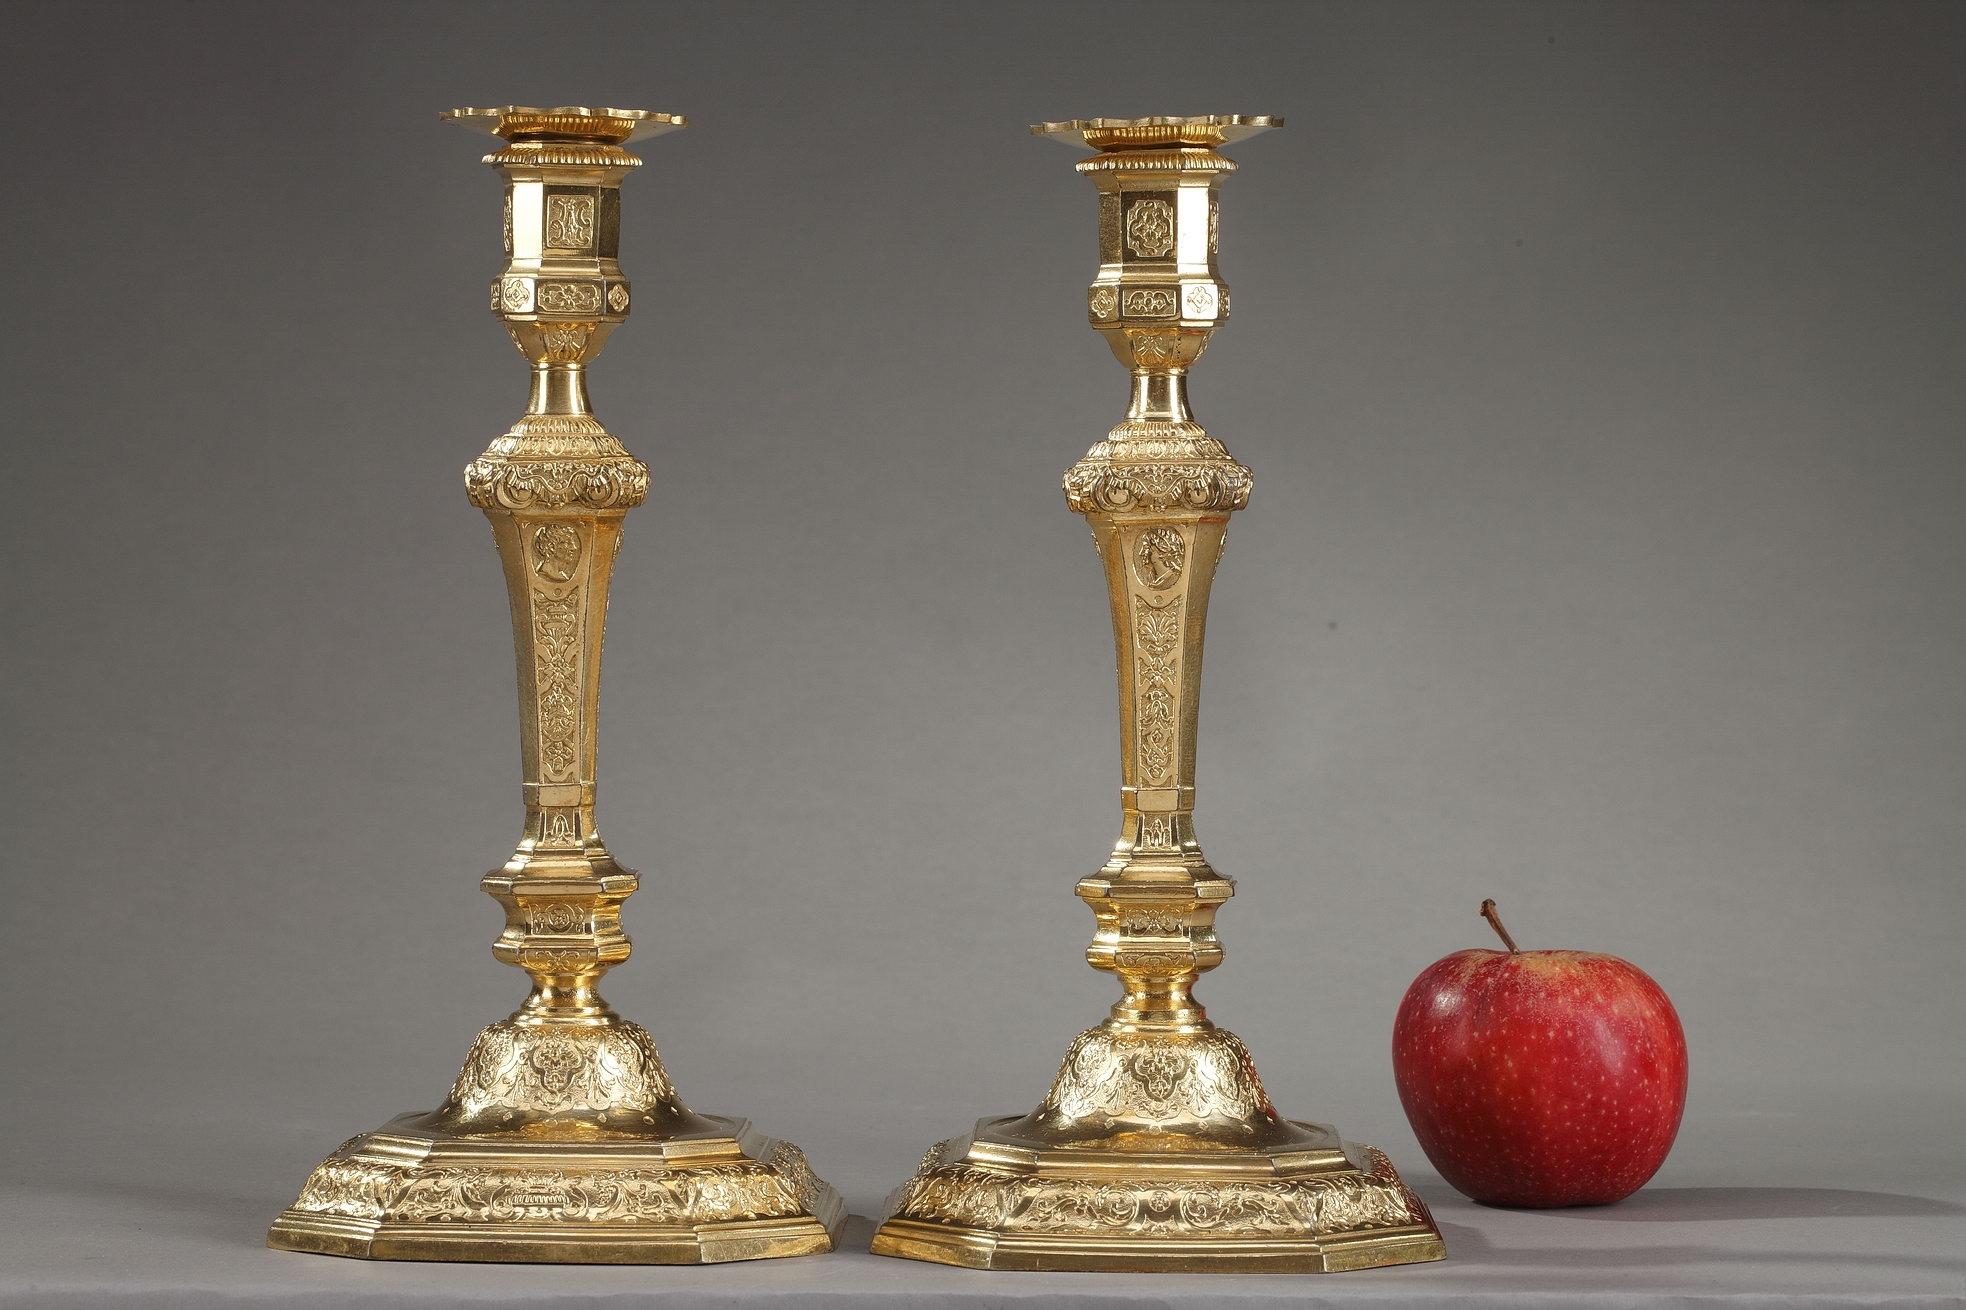 Pair of Louis XIV-Louis XV style candlesticks with chamfered angles. The stem of these ormolu Regency style lights is engraved with foliage, arabesques, antique vases and masks on a matting background. The stem presents several profiles in relief,